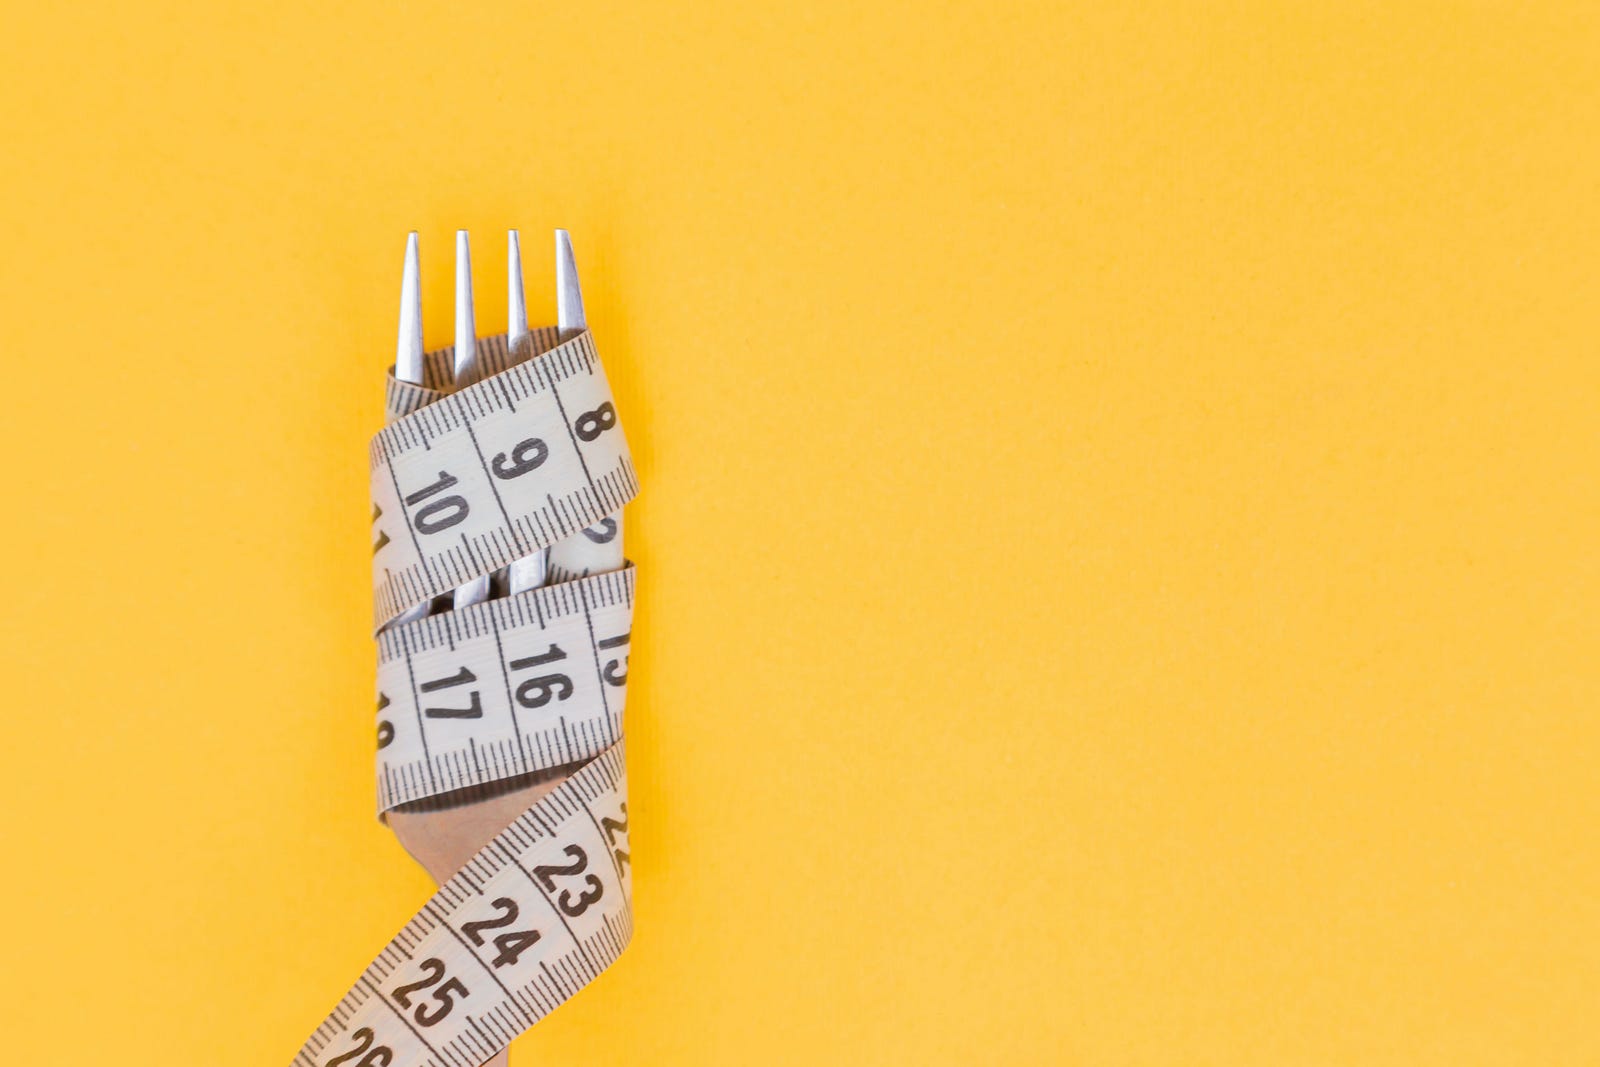 A tape measure is wrapped around the tines of a fork. Mustard-colored background. The blood-gut microbiome axis has plasticity in adults, helping to regulate food intake and keeping our weight stable. The gut microbiota creates chemical signals that determine eating behavior through interactions with the brain.